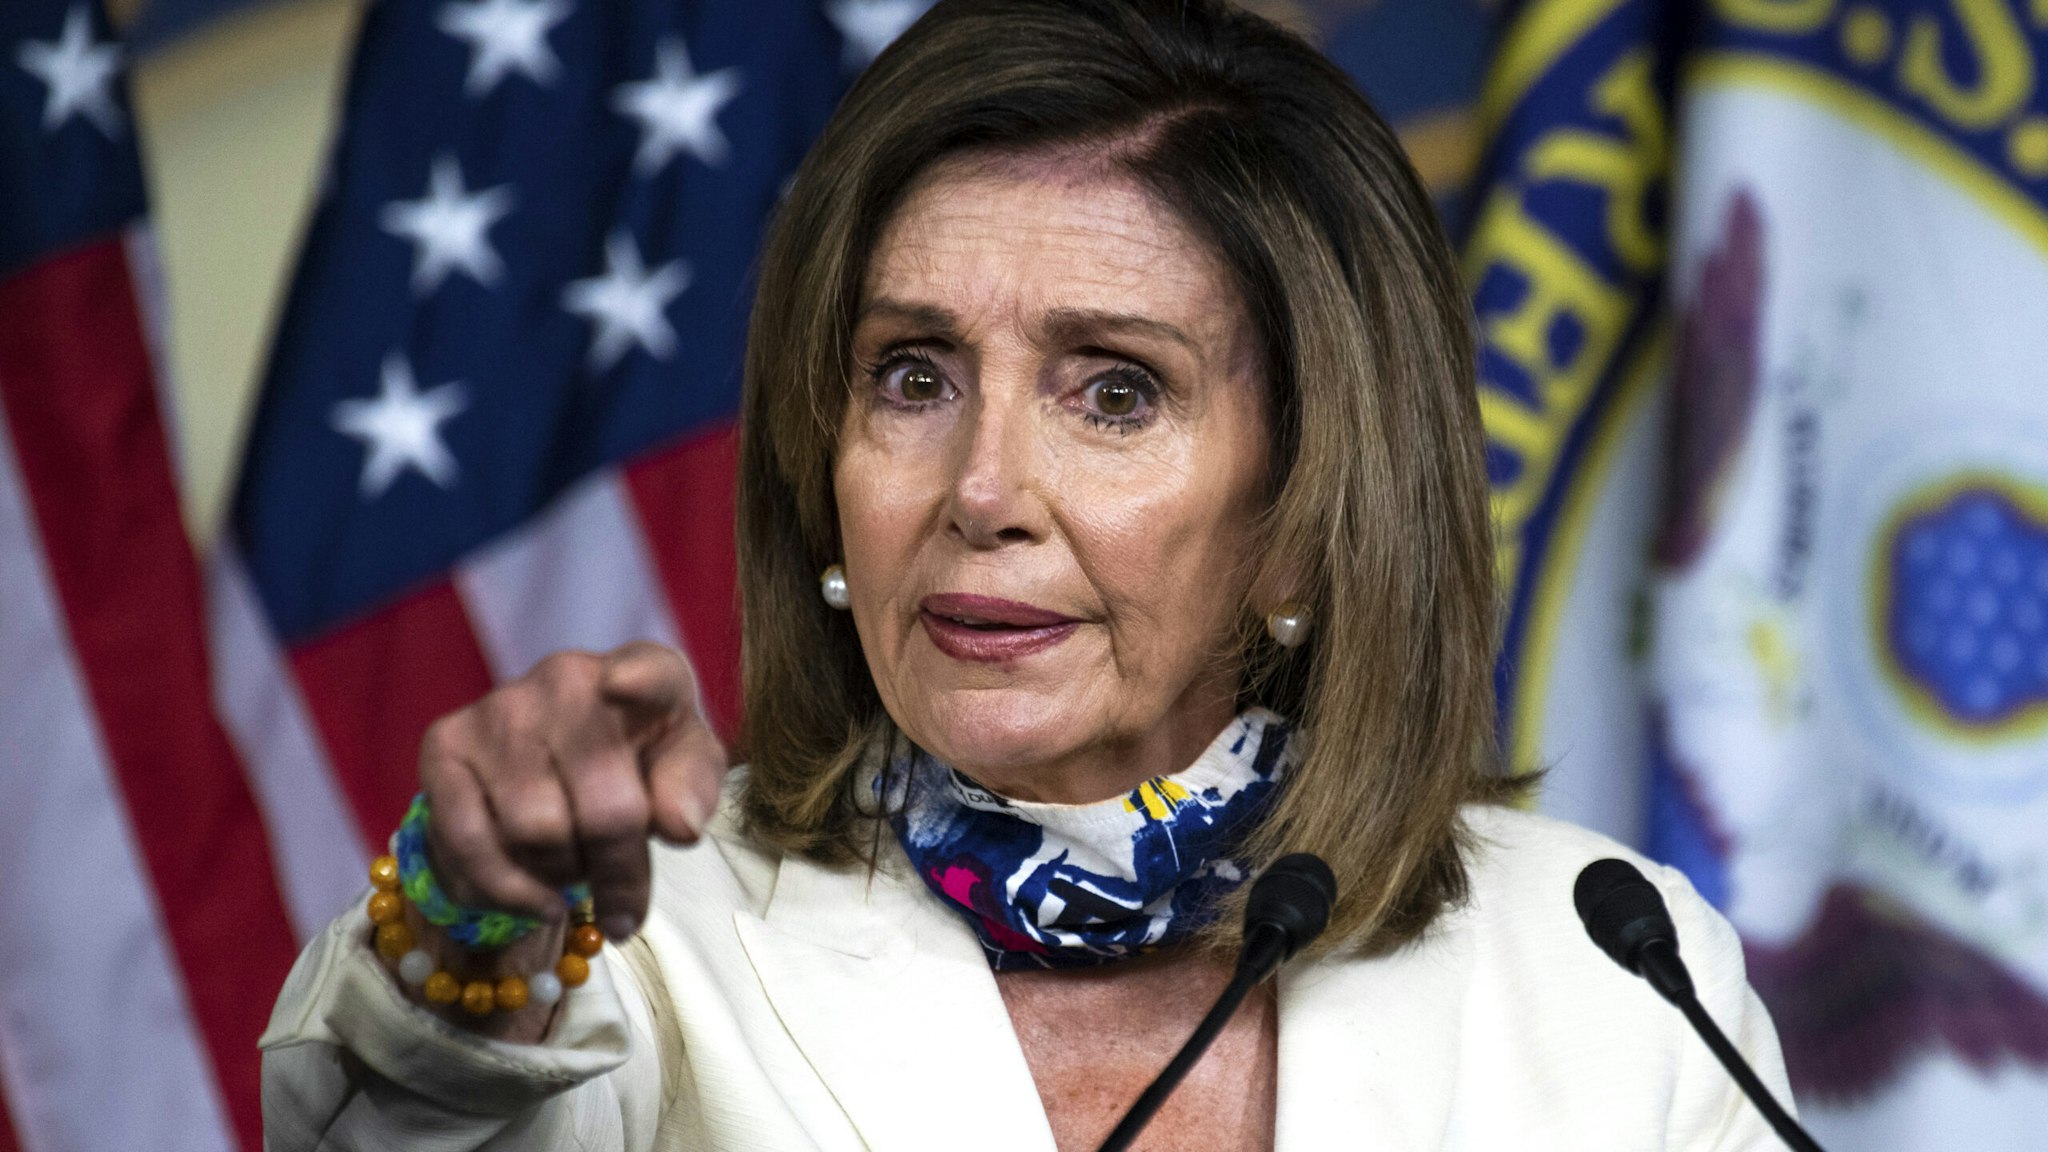 UNITED STATES - JULY 16: Speaker of the House Nancy Pelosi, D-Calif., conducts a news conference in the Capitol Visitor Center on Thursday, July 16, 2020.